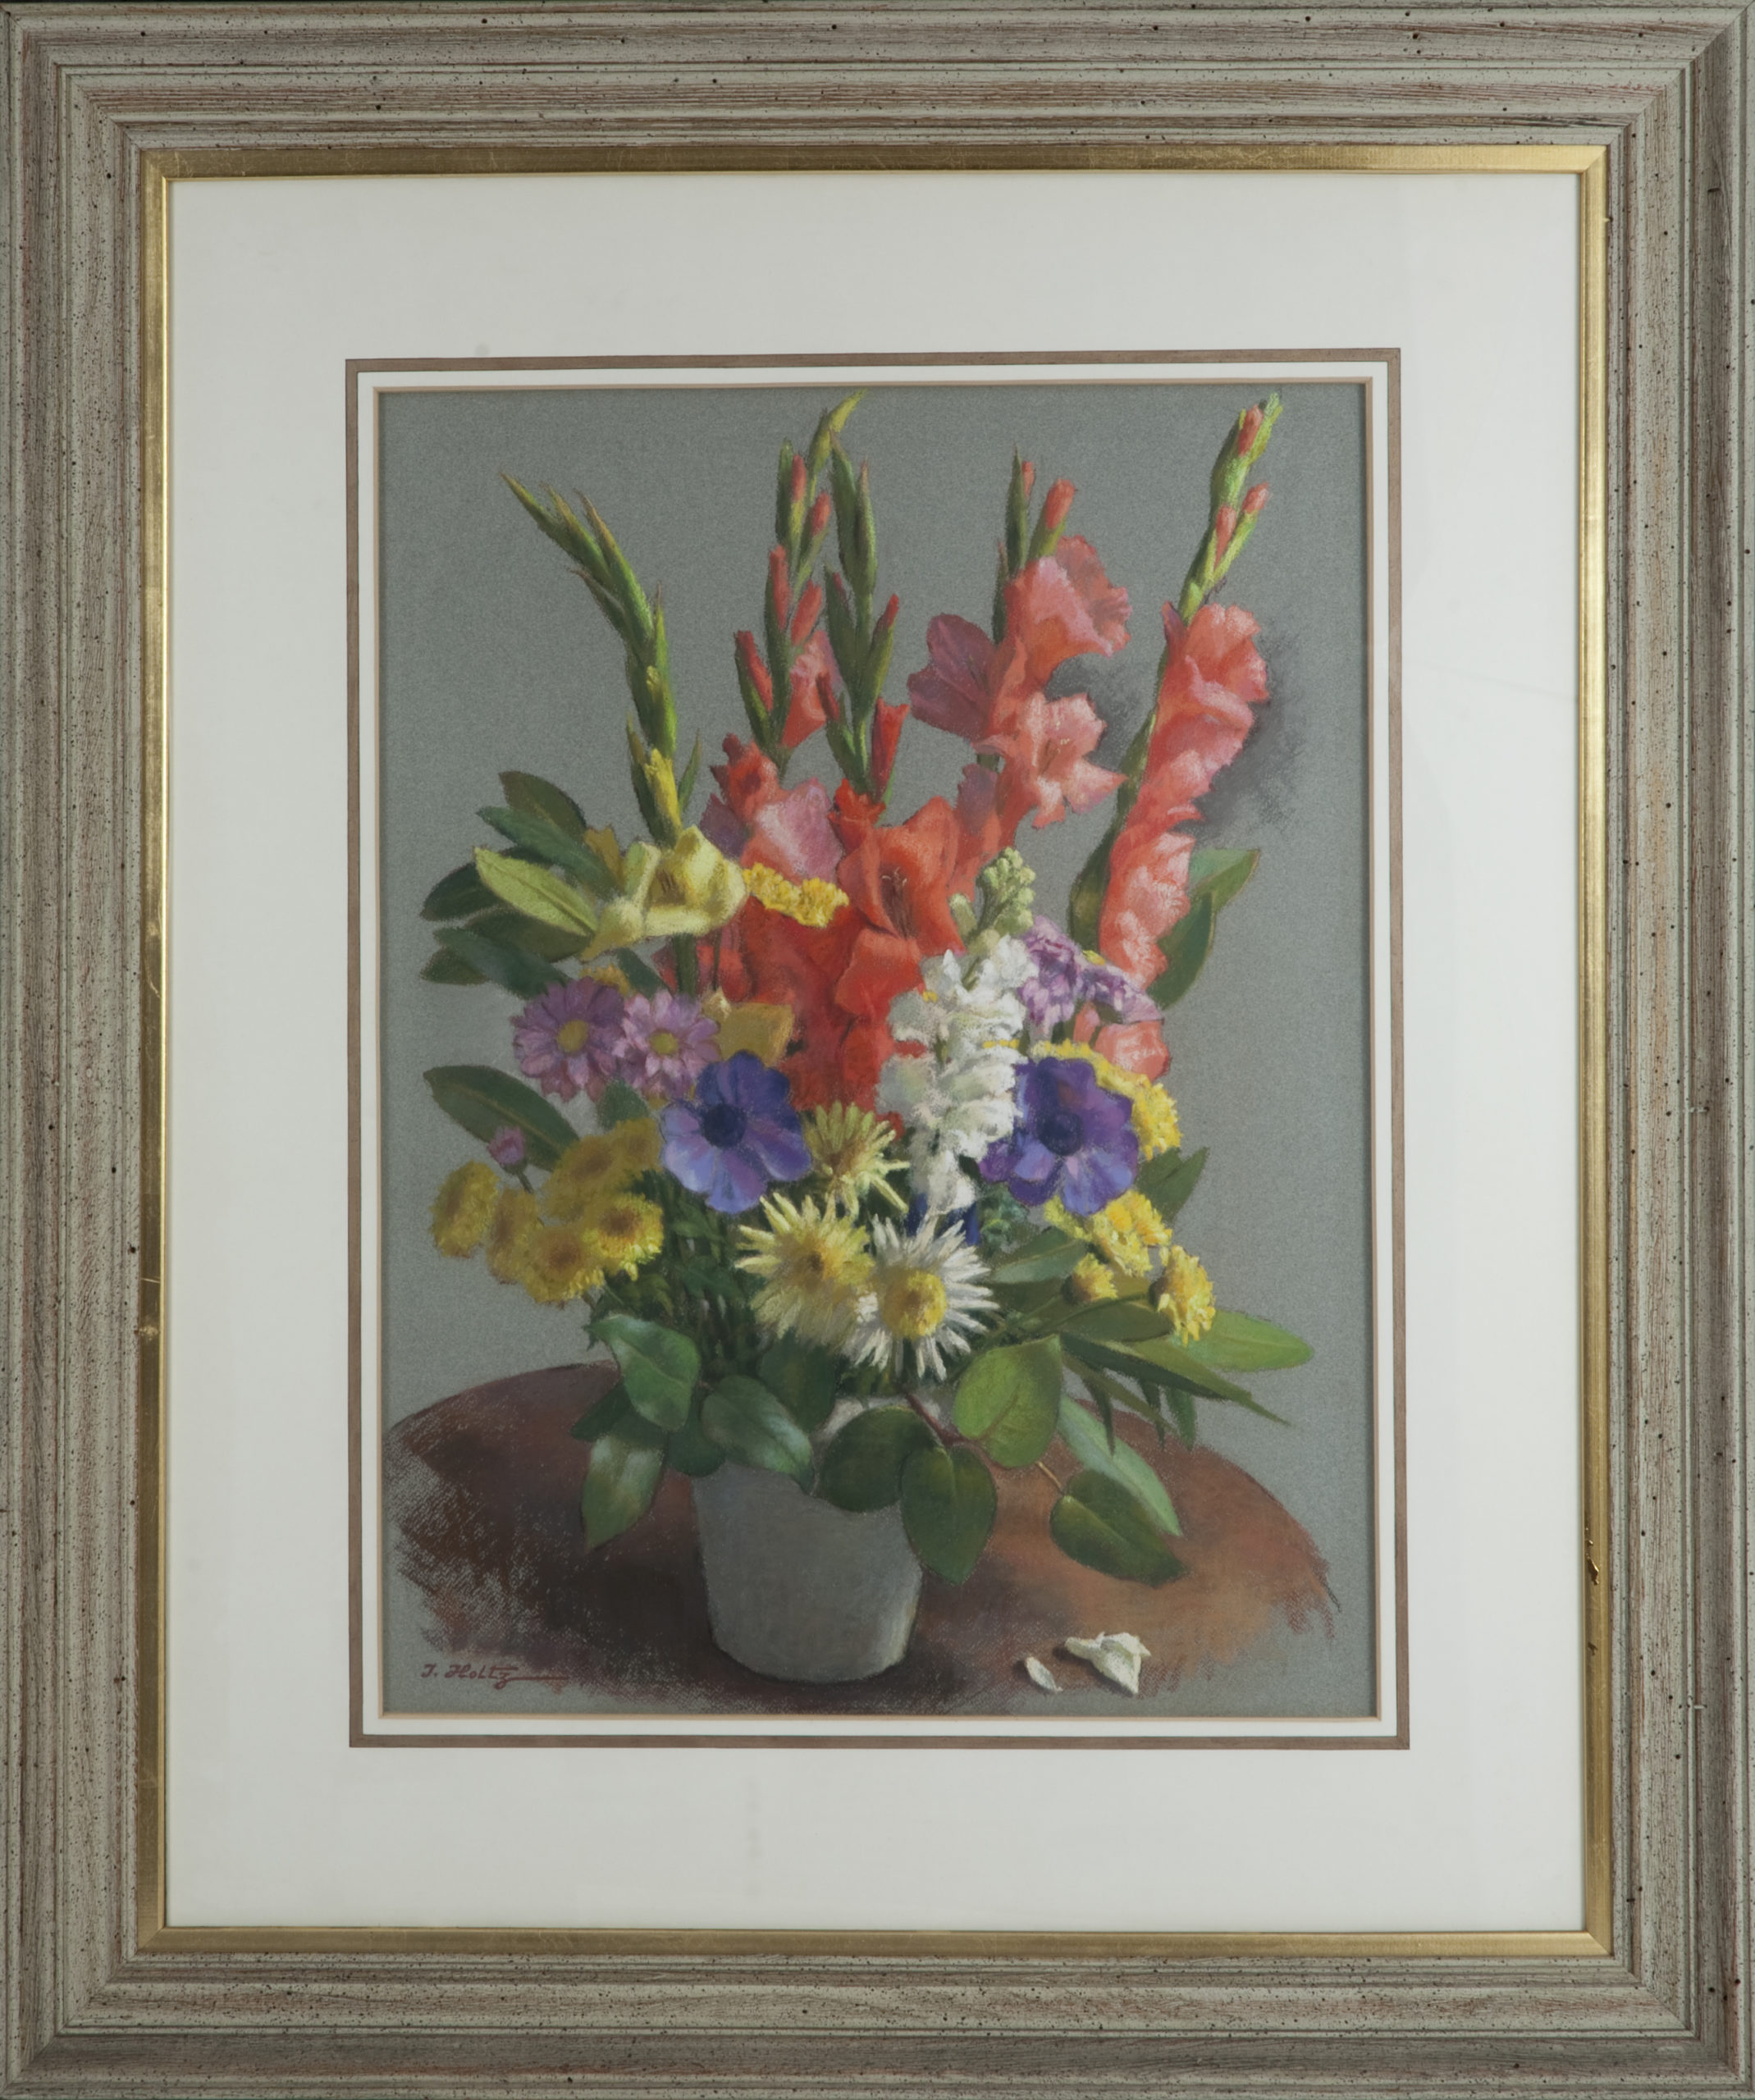 251 Still Life with Red and Yellow Gladiolas 1963 - Pastel - 19 x 25 - Frame: 33 x 39.25 x 1.75